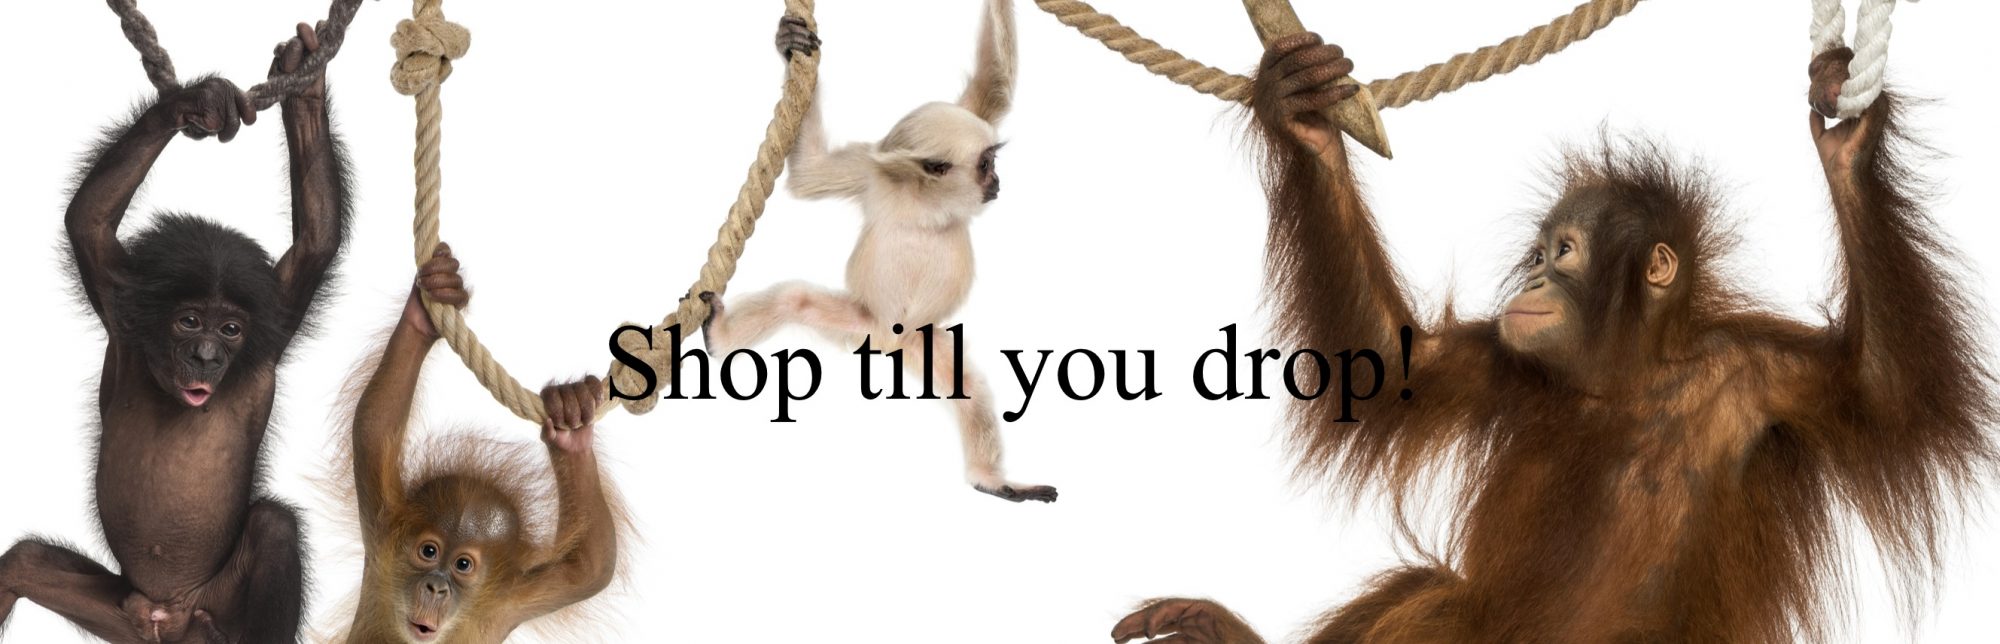 The Tacky Monkey – re-purpose for a purpose!